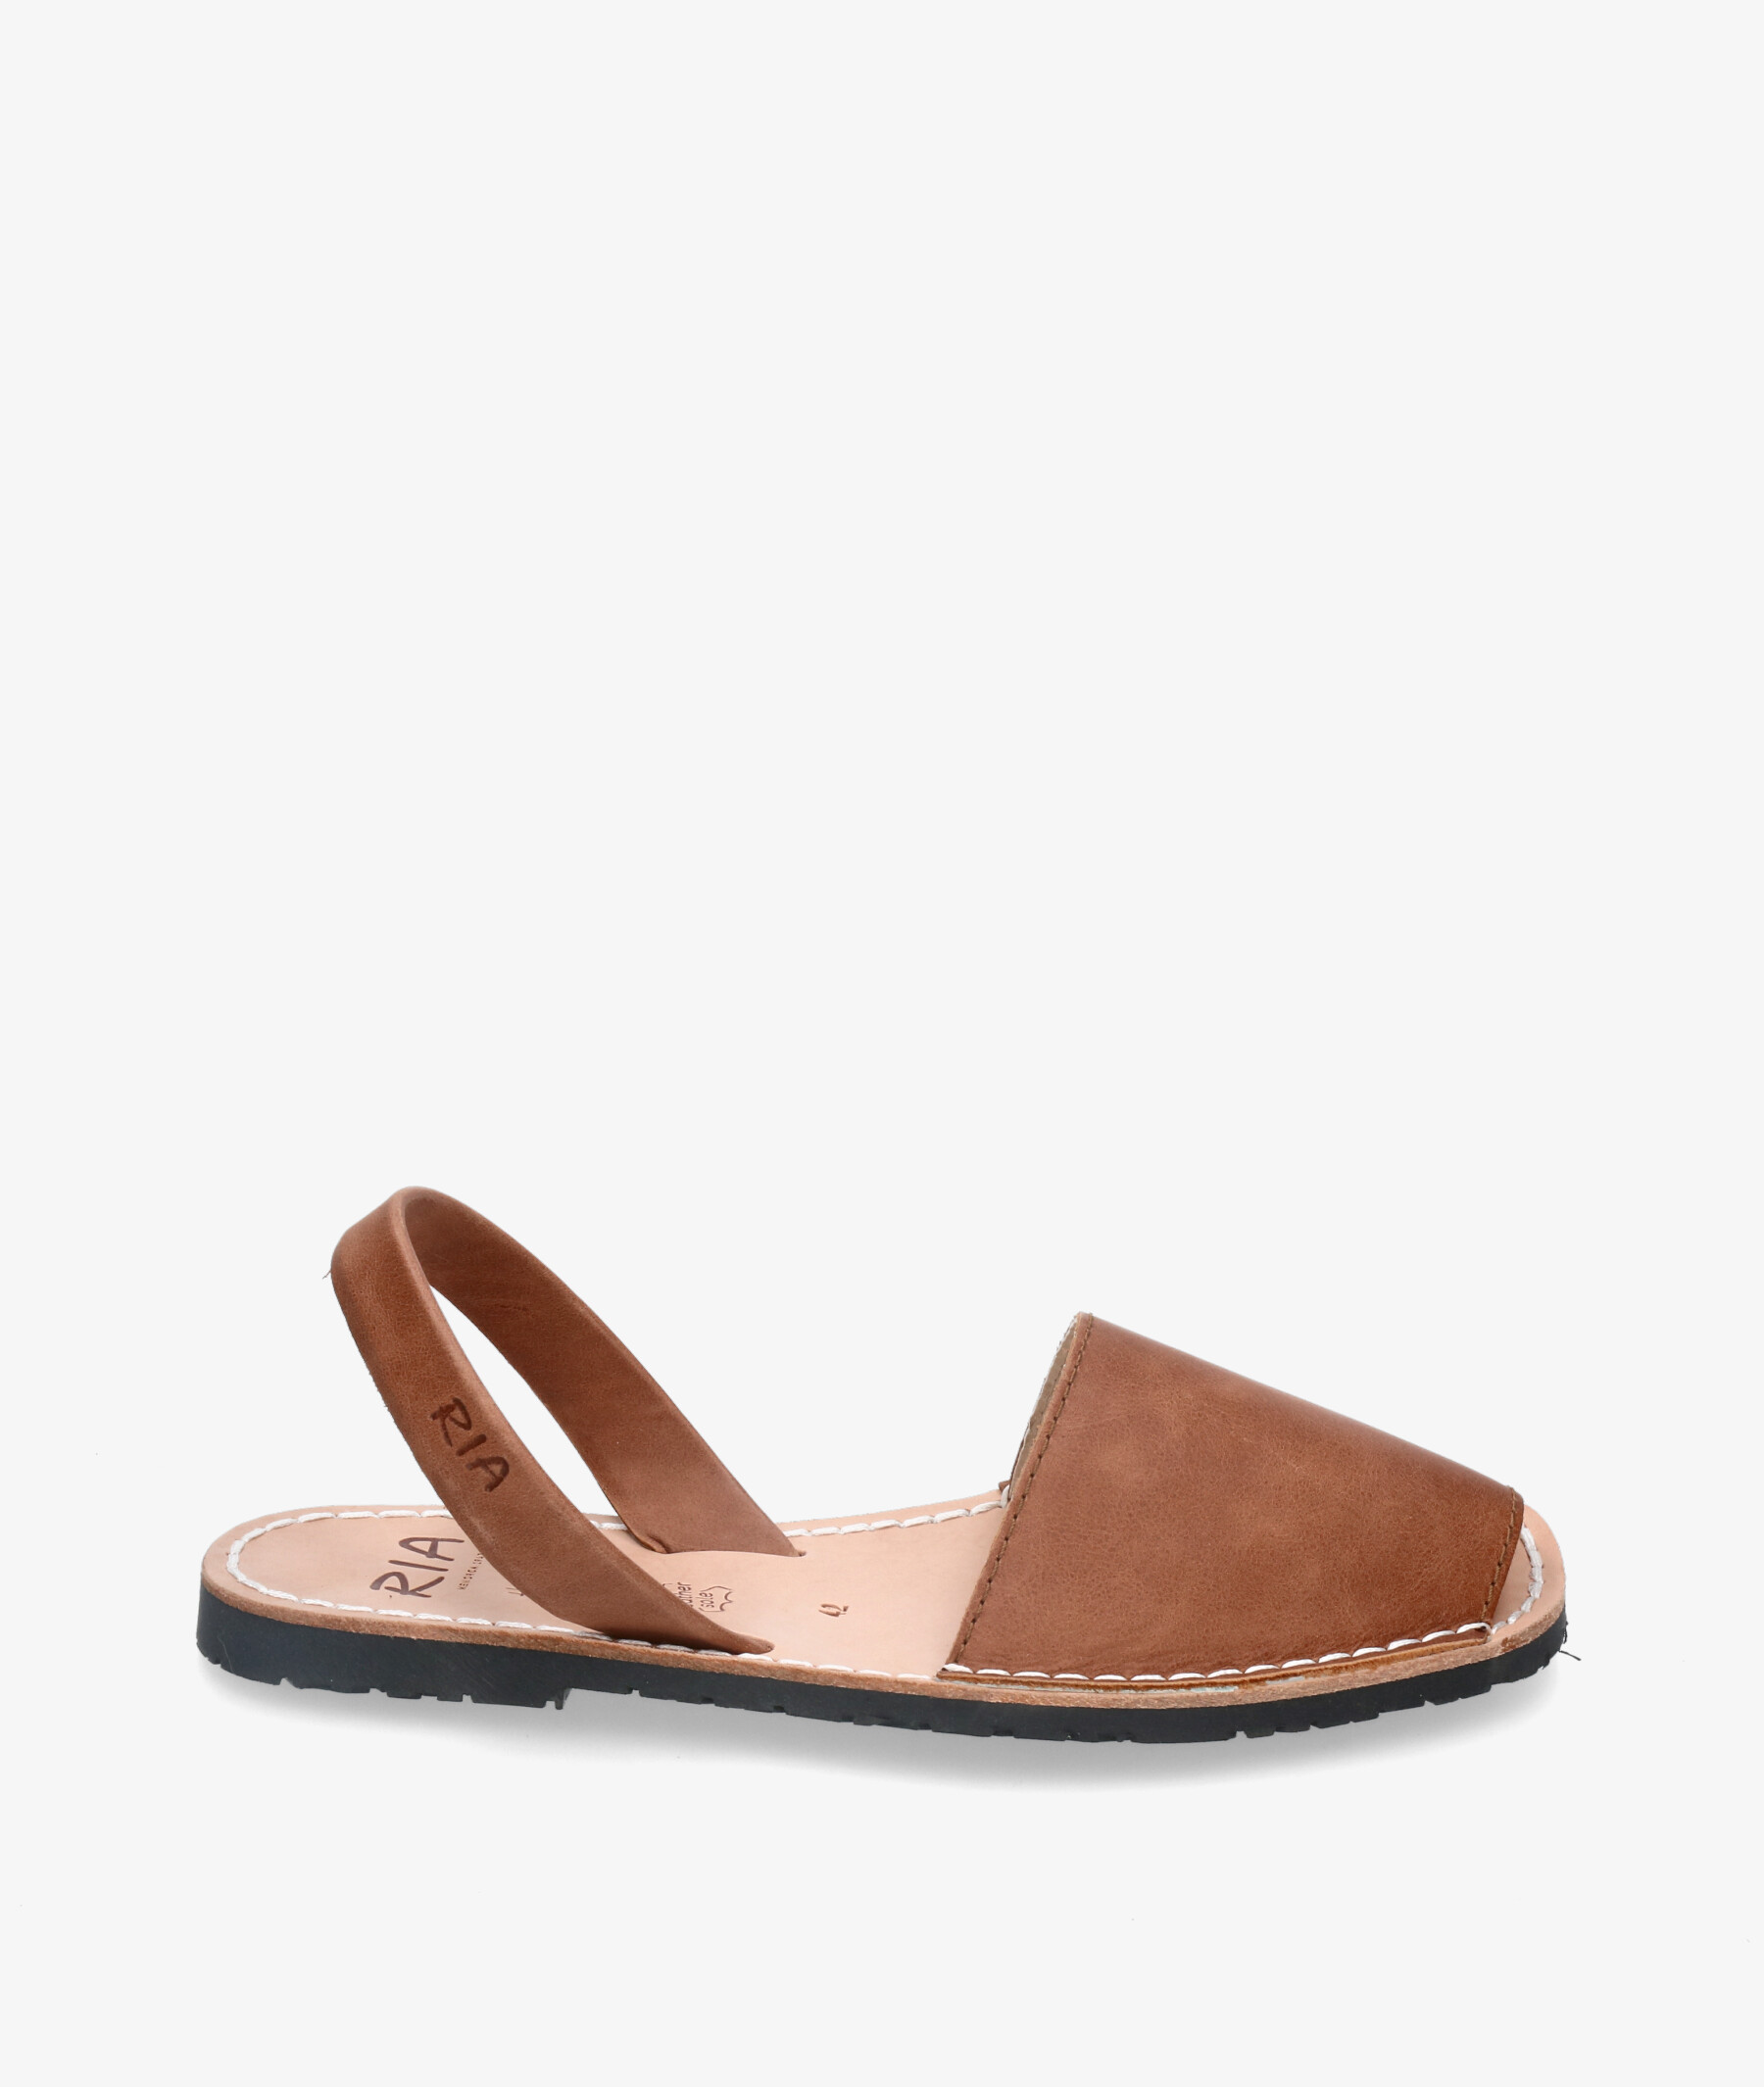 Look stylish this season with this leather Sandals from our Ria collection